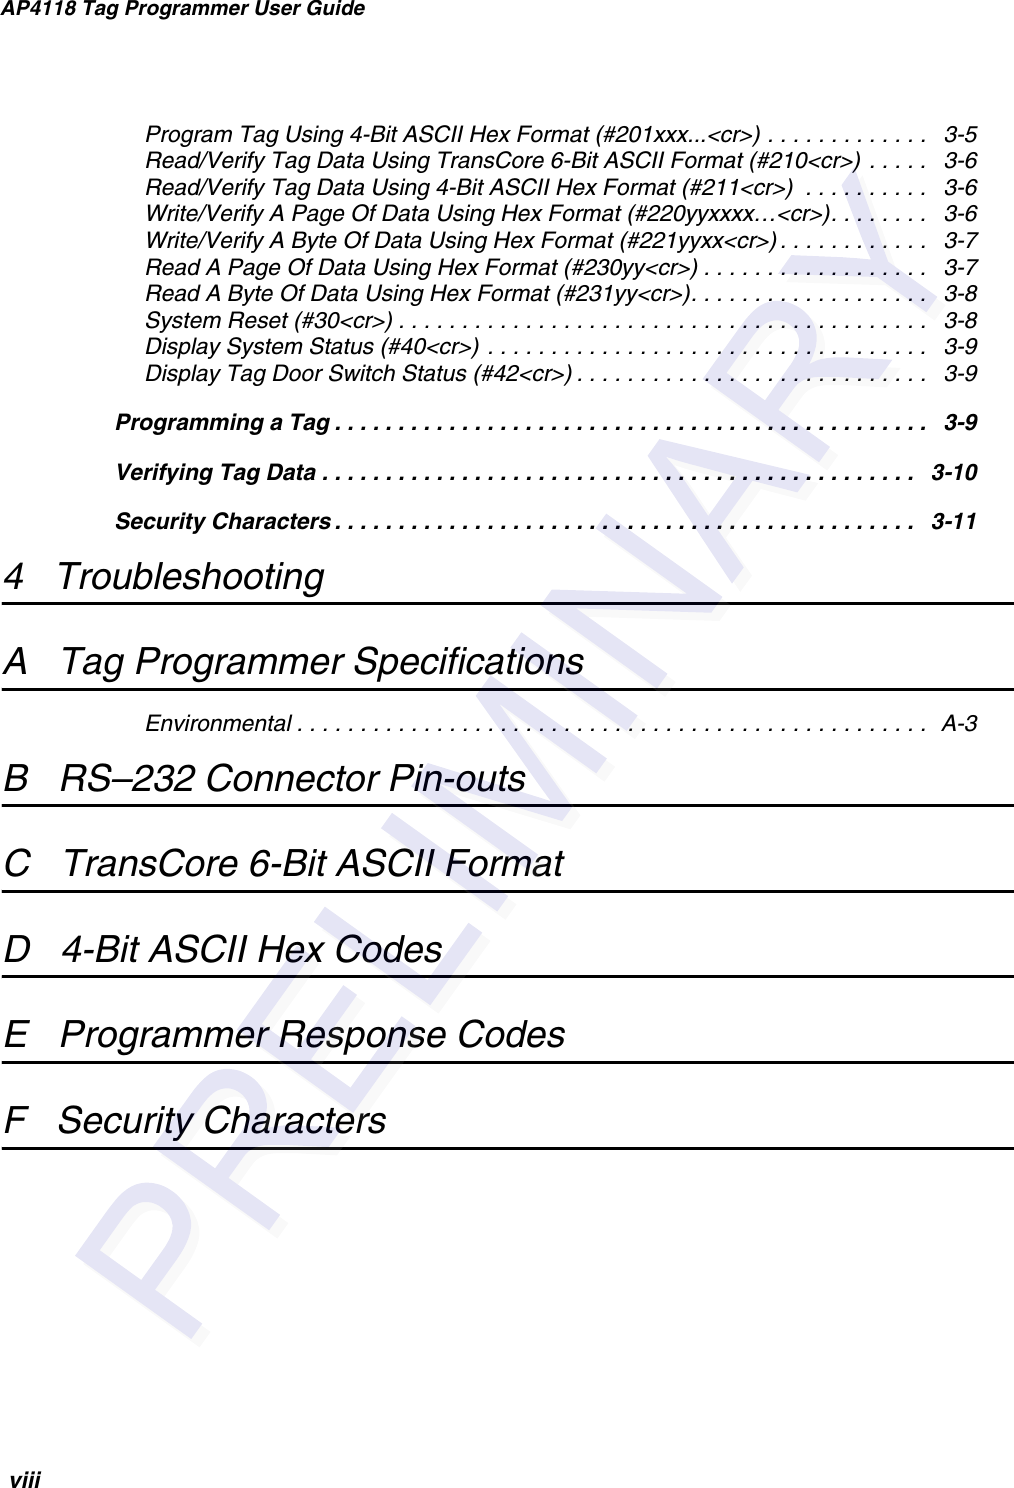 AP4118 Tag Programmer User Guide viiiProgram Tag Using 4-Bit ASCII Hex Format (#201xxx...&lt;cr&gt;) . . . . . . . . . . . . .   3-5Read/Verify Tag Data Using TransCore 6-Bit ASCII Format (#210&lt;cr&gt;) . . . . .   3-6Read/Verify Tag Data Using 4-Bit ASCII Hex Format (#211&lt;cr&gt;)  . . . . . . . . . .   3-6Write/Verify A Page Of Data Using Hex Format (#220yyxxxx…&lt;cr&gt;). . . . . . . .   3-6Write/Verify A Byte Of Data Using Hex Format (#221yyxx&lt;cr&gt;) . . . . . . . . . . . .   3-7Read A Page Of Data Using Hex Format (#230yy&lt;cr&gt;) . . . . . . . . . . . . . . . . . .   3-7Read A Byte Of Data Using Hex Format (#231yy&lt;cr&gt;). . . . . . . . . . . . . . . . . . .   3-8System Reset (#30&lt;cr&gt;) . . . . . . . . . . . . . . . . . . . . . . . . . . . . . . . . . . . . . . . . . .   3-8Display System Status (#40&lt;cr&gt;) . . . . . . . . . . . . . . . . . . . . . . . . . . . . . . . . . . .   3-9Display Tag Door Switch Status (#42&lt;cr&gt;) . . . . . . . . . . . . . . . . . . . . . . . . . . . .   3-9Programming a Tag . . . . . . . . . . . . . . . . . . . . . . . . . . . . . . . . . . . . . . . . . . . . . . .   3-9Verifying Tag Data . . . . . . . . . . . . . . . . . . . . . . . . . . . . . . . . . . . . . . . . . . . . . . .   3-10Security Characters . . . . . . . . . . . . . . . . . . . . . . . . . . . . . . . . . . . . . . . . . . . . . .   3-114   TroubleshootingA   Tag Programmer SpecificationsEnvironmental . . . . . . . . . . . . . . . . . . . . . . . . . . . . . . . . . . . . . . . . . . . . . . . . . .  A-3B   RS–232 Connector Pin-outsC   TransCore 6-Bit ASCII FormatD   4-Bit ASCII Hex CodesE   Programmer Response CodesF   Security Characters